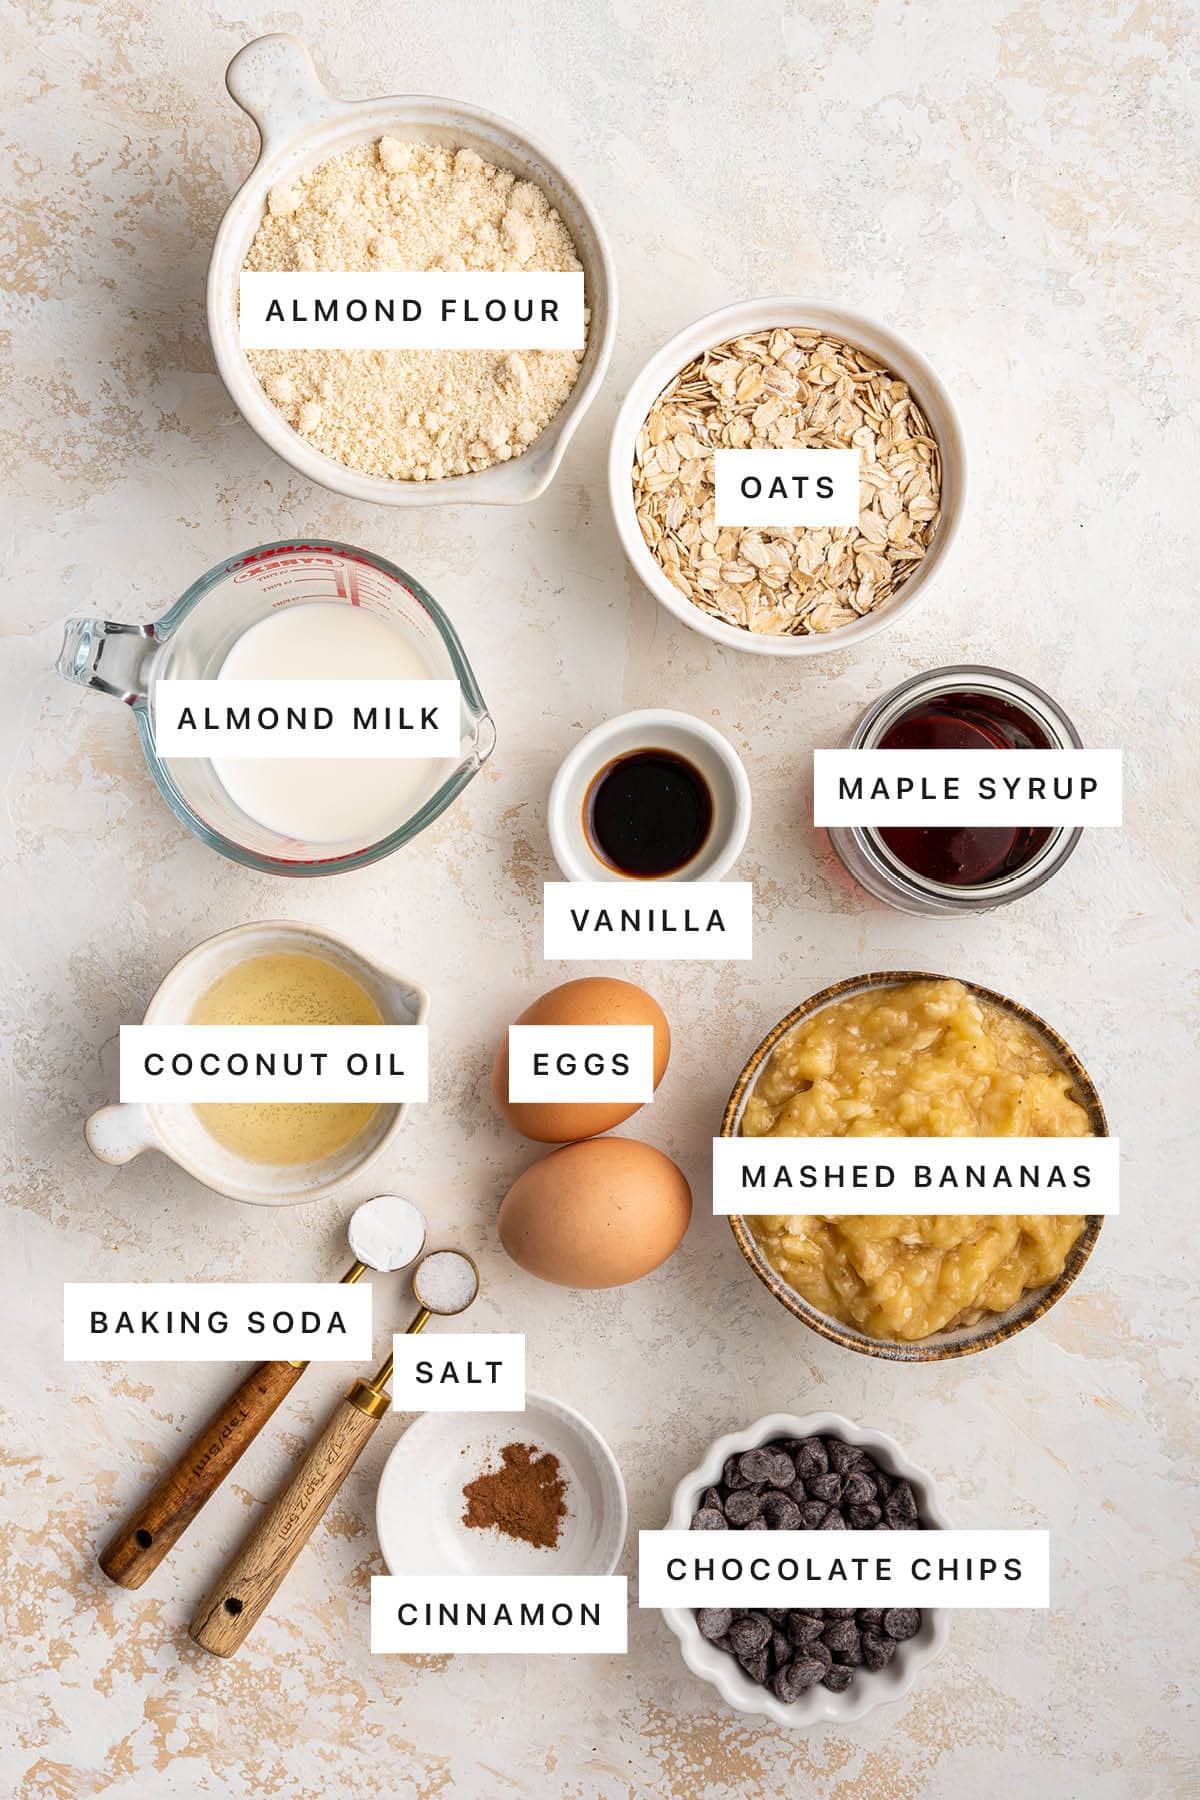 Ingredients measured out to make Banana Blender Muffins: almond flour, oats, almond milk, vanilla, maple syrup, coconut oil, eggs, mashed bananas, baking soda, salt, cinnamon and chocolate chips.